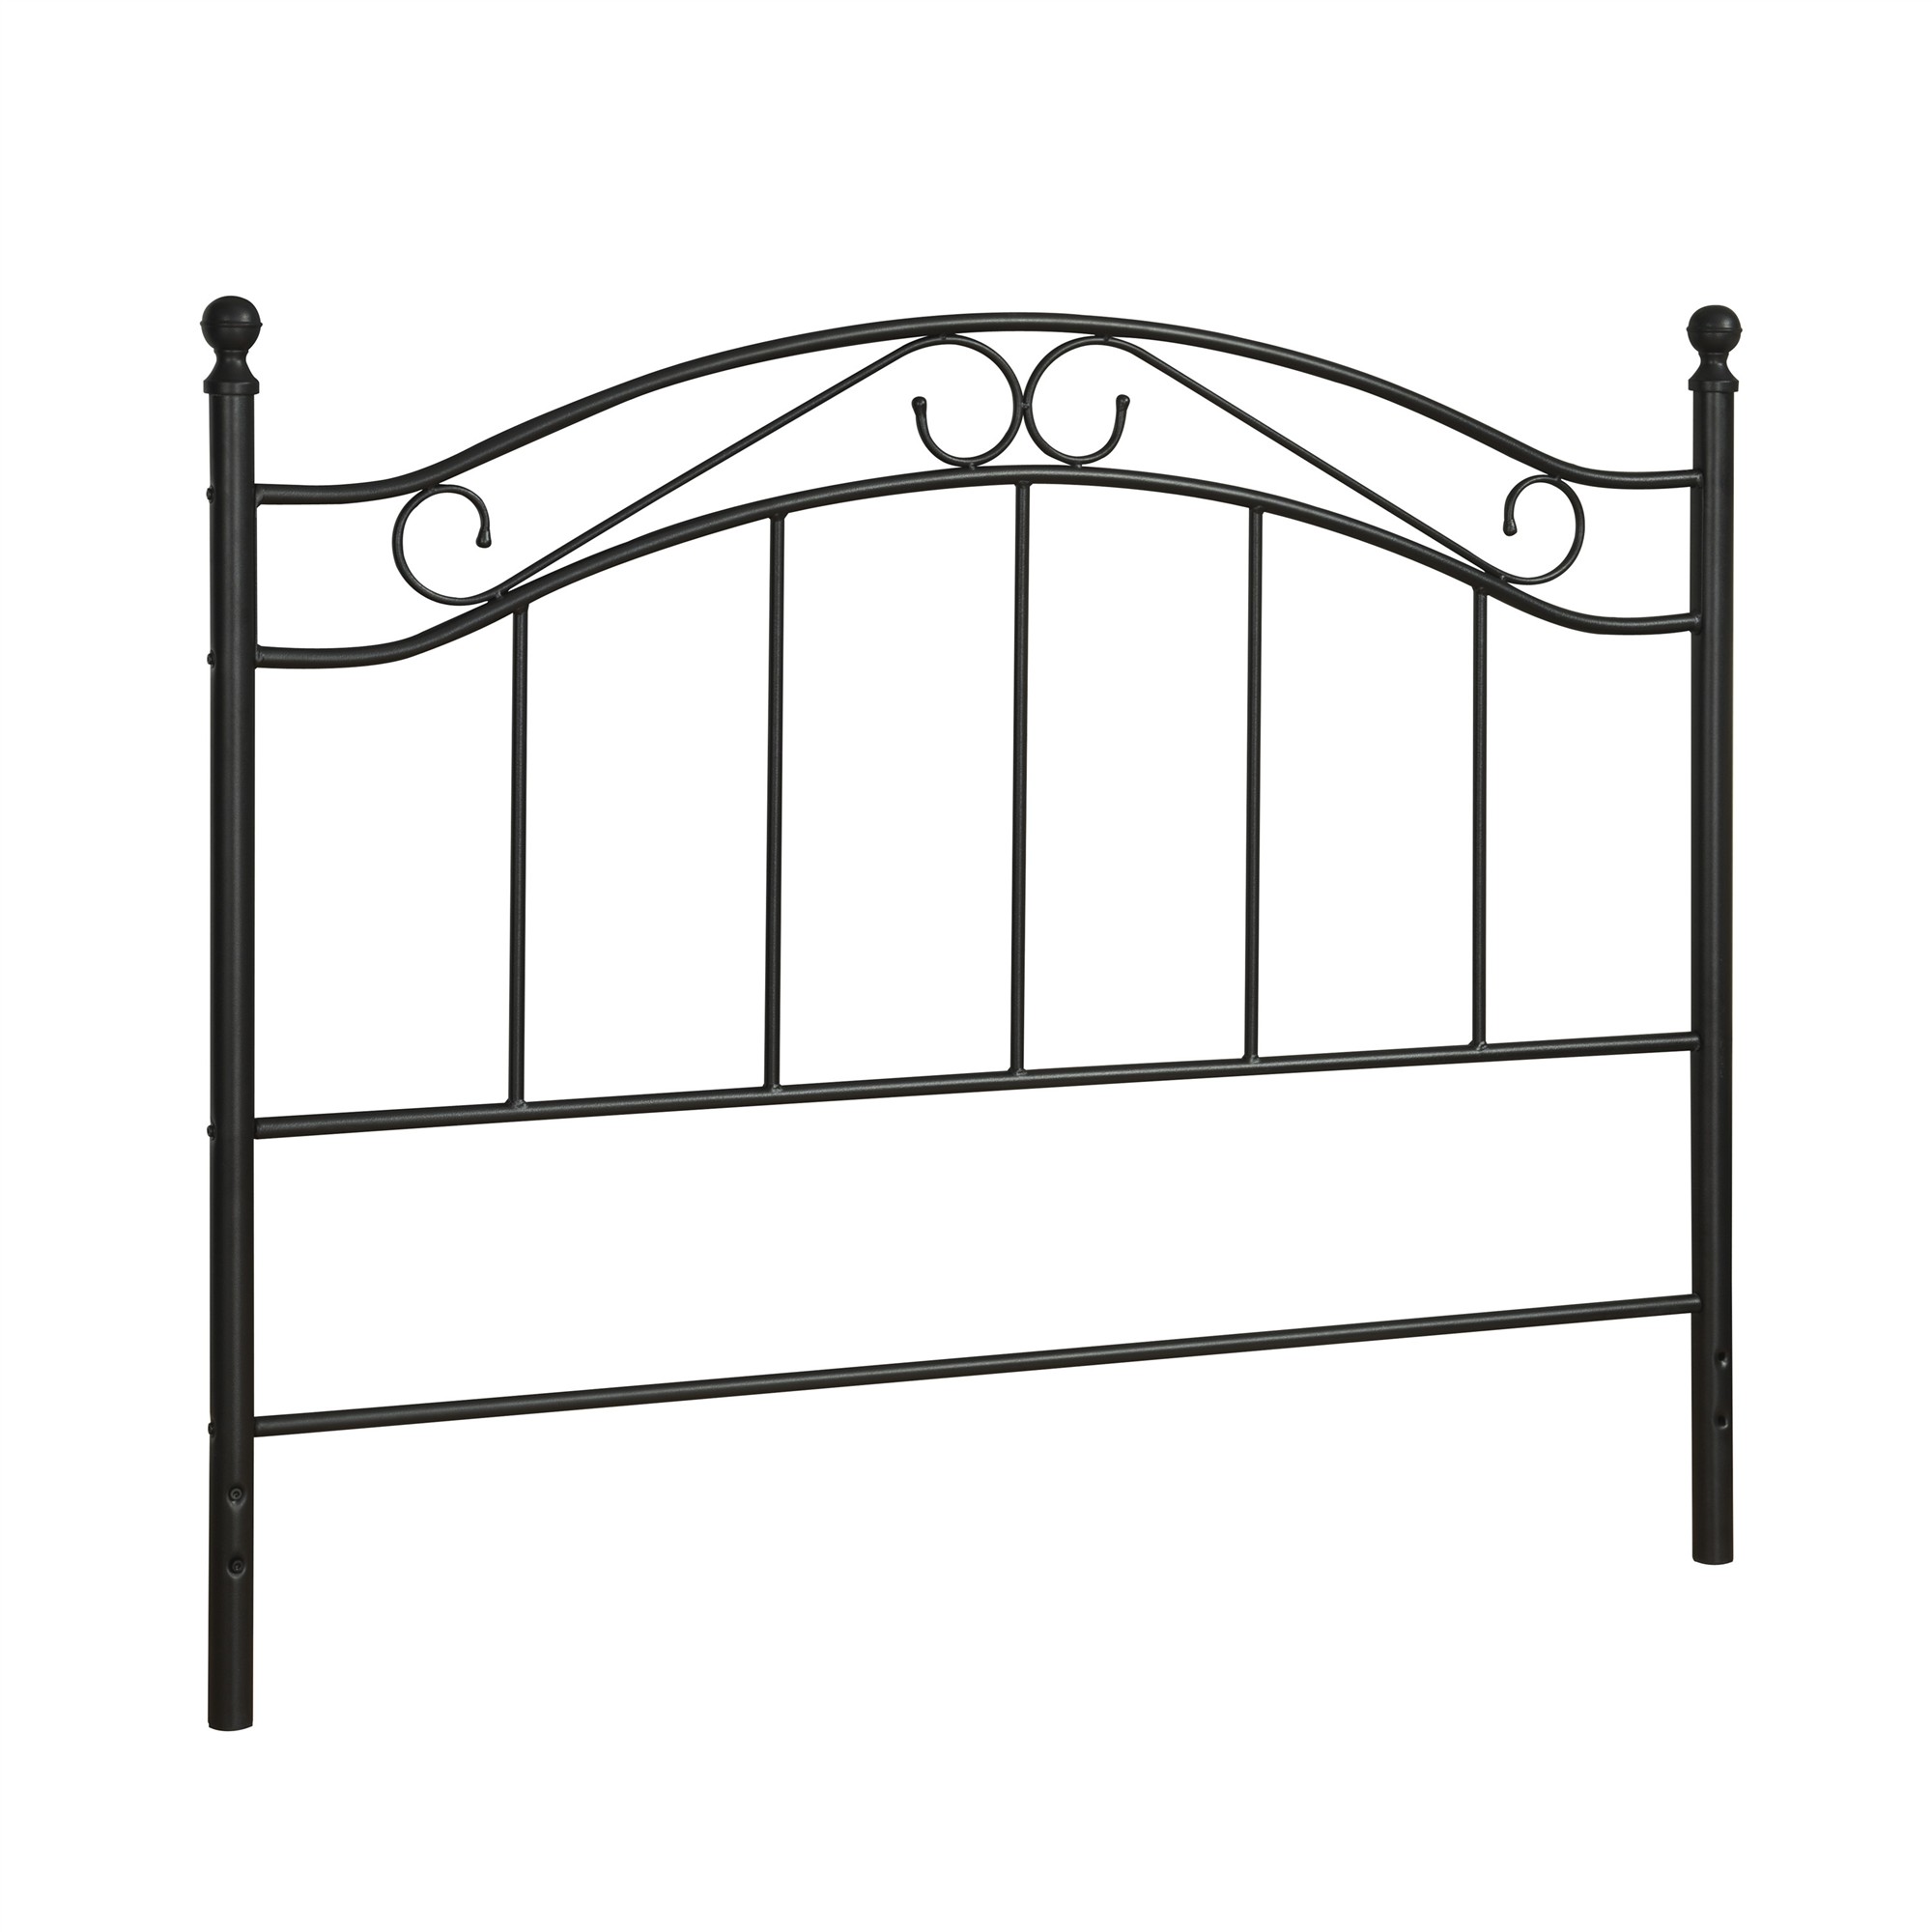 Mainstays Full/Queen Metal Headboard with Delicate Detailing, Black - image 4 of 8